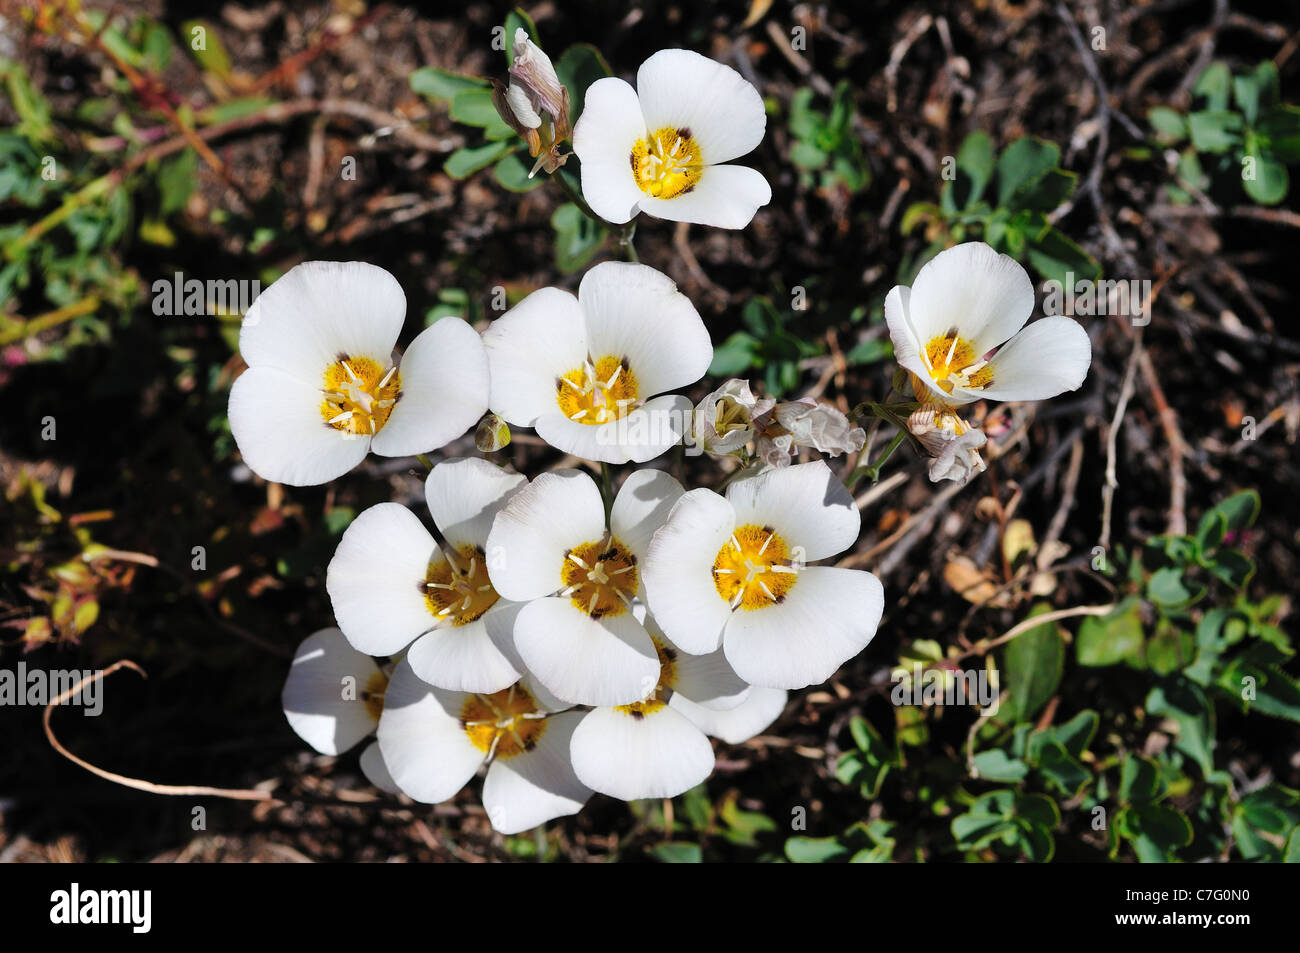 A cluster of Mariposa lilies blooming in the wild. Yosemite National Park, California, USA. Stock Photo